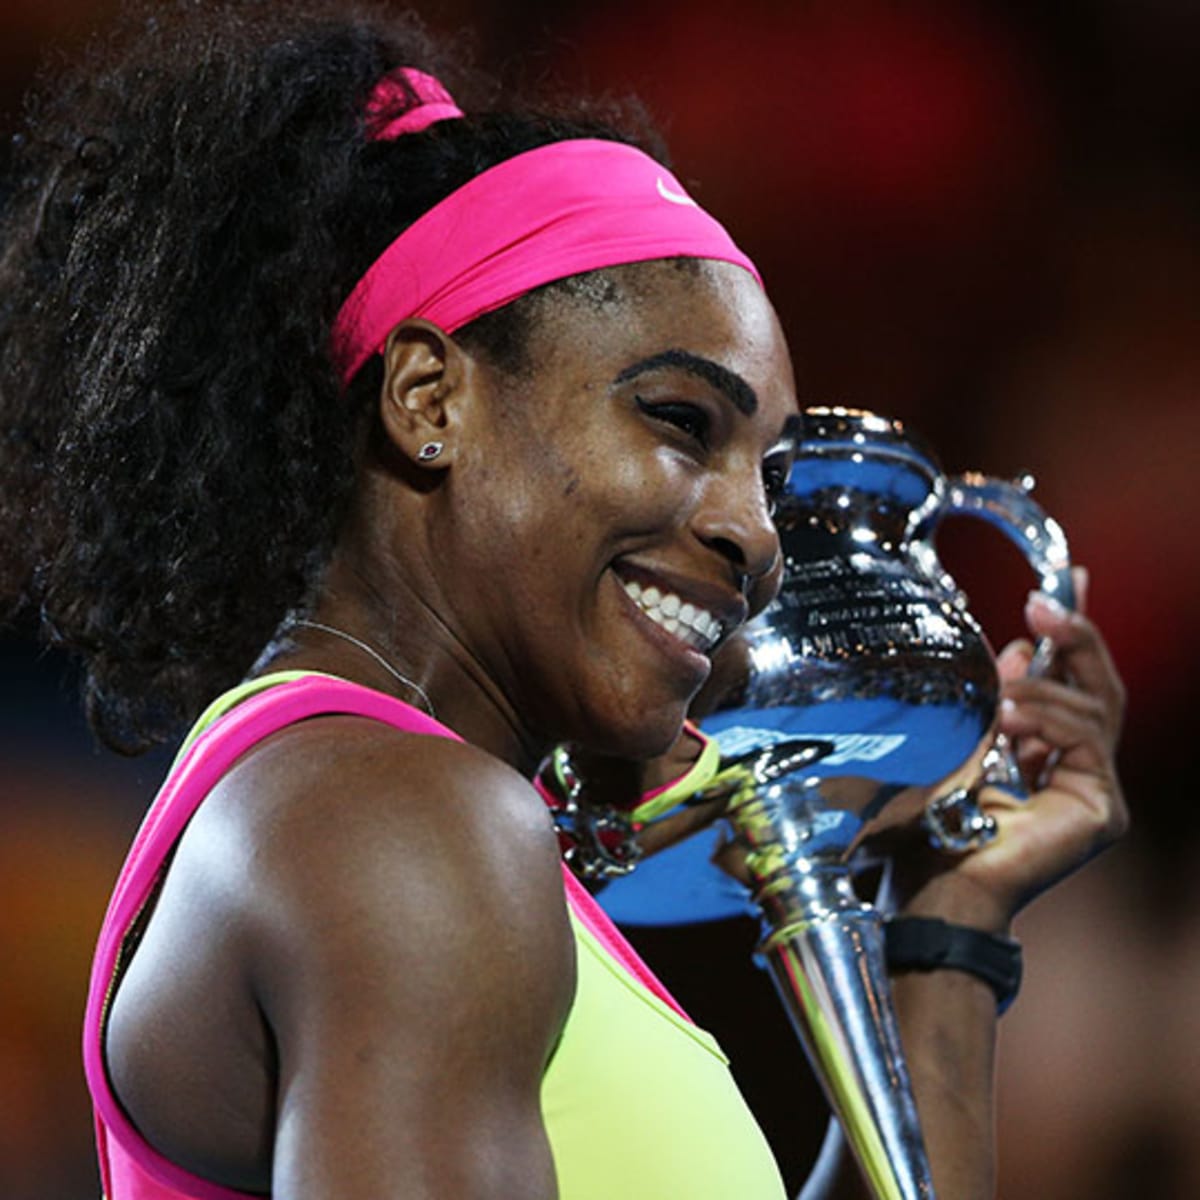 Serena Williams bounces into action ahead of the Australian Open